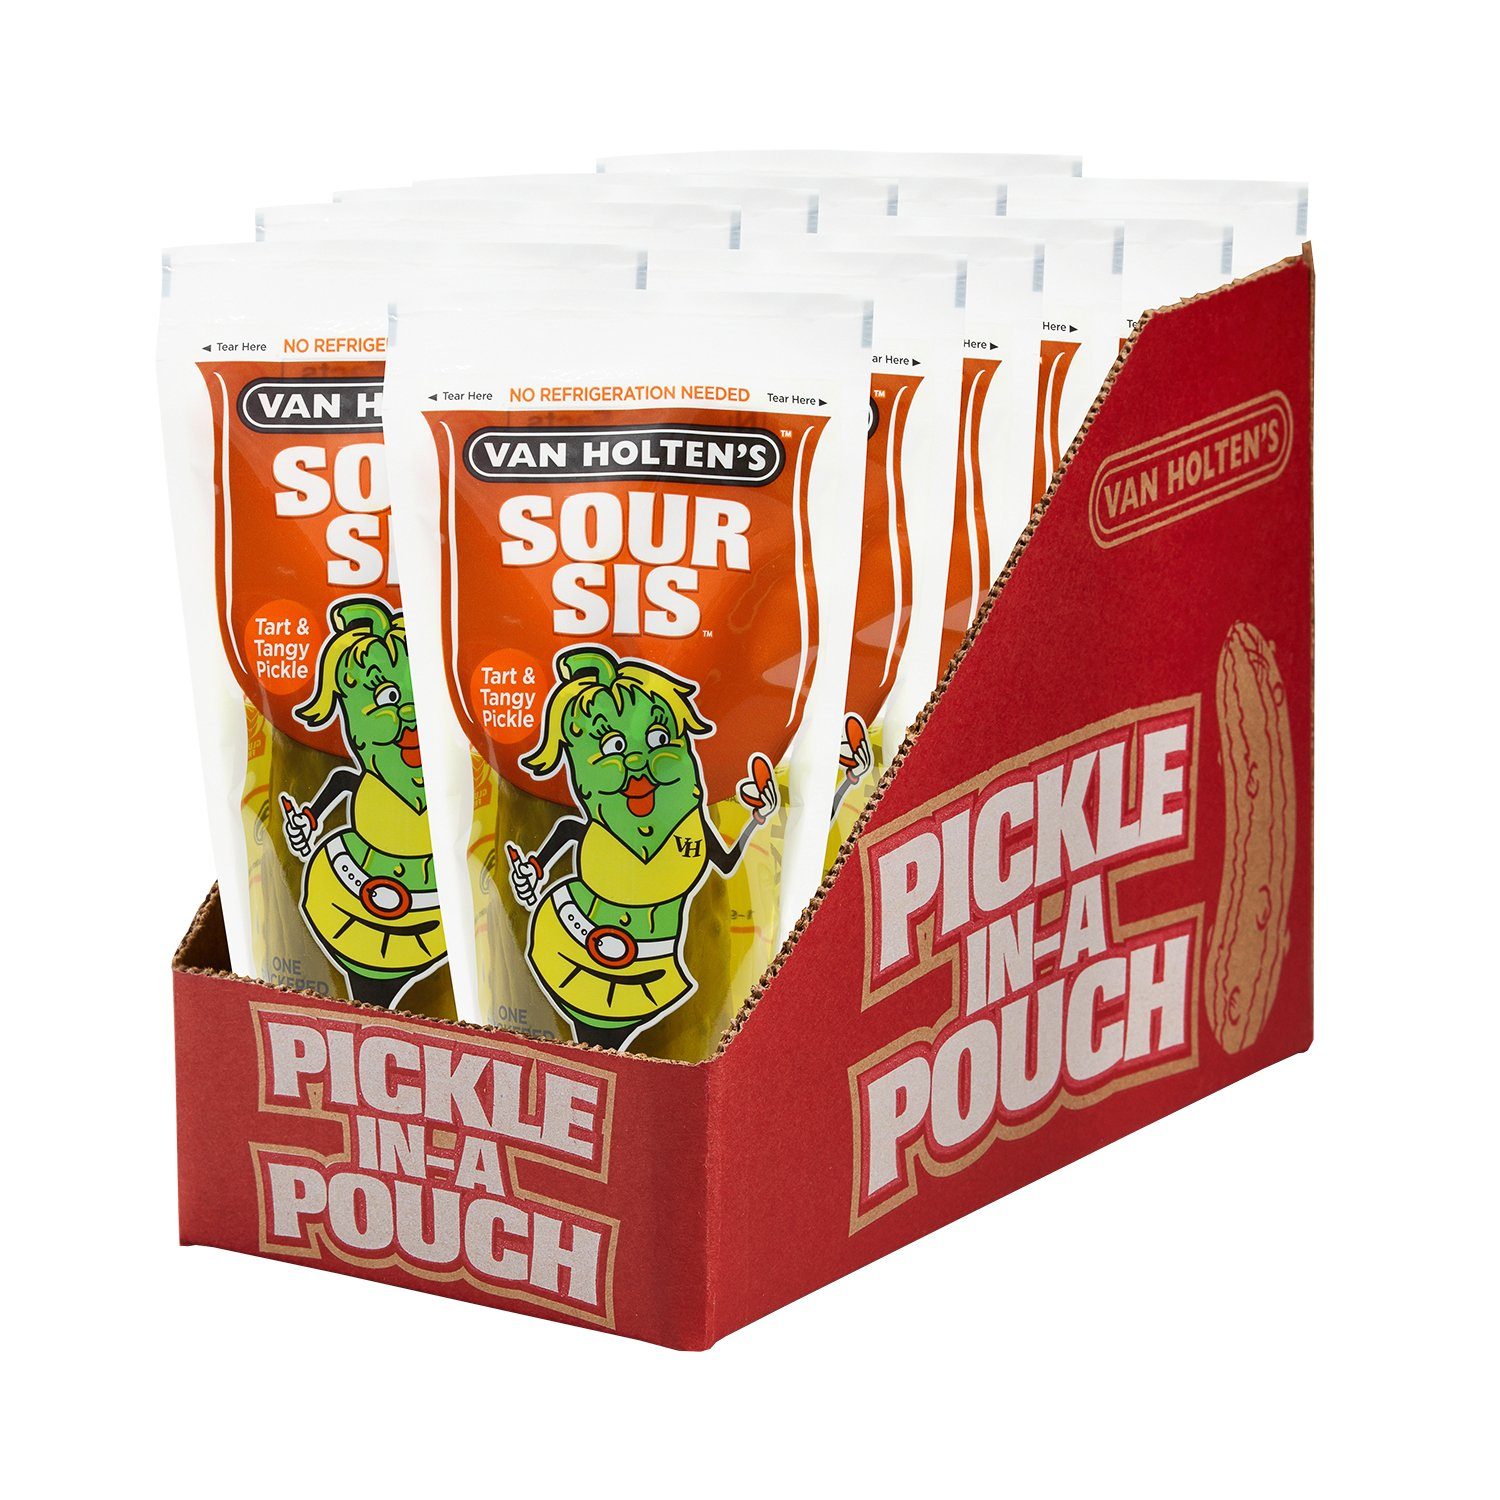 Van Holten's Pickle-In-A-Pouch Van Holten’s Sour King Size (about 9 Oz)-12 Count 